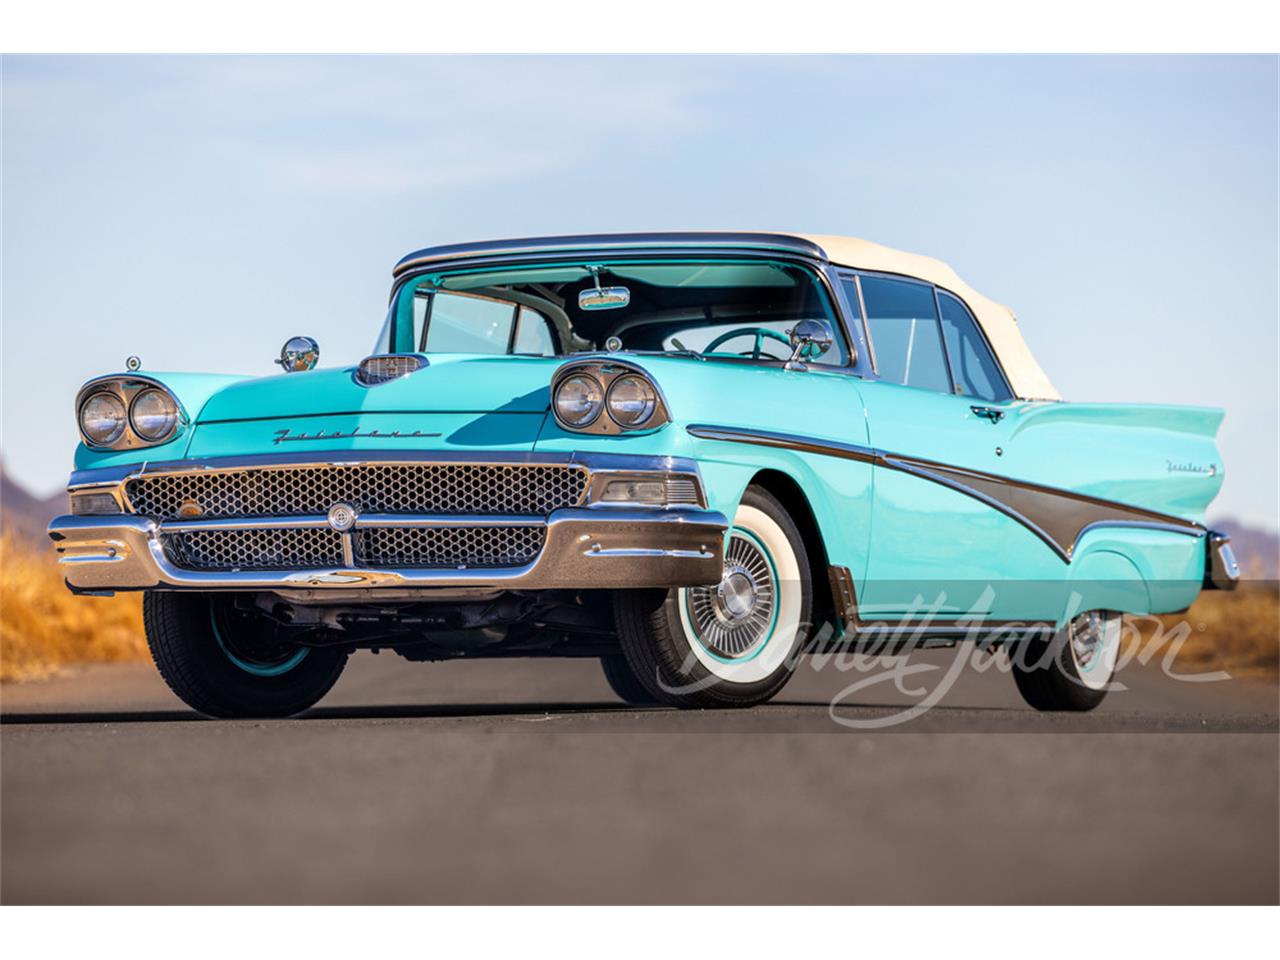 For Sale at Auction: 1958 Ford Fairlane 500 in Scottsdale, Arizona for sale in Scottsdale, AZ